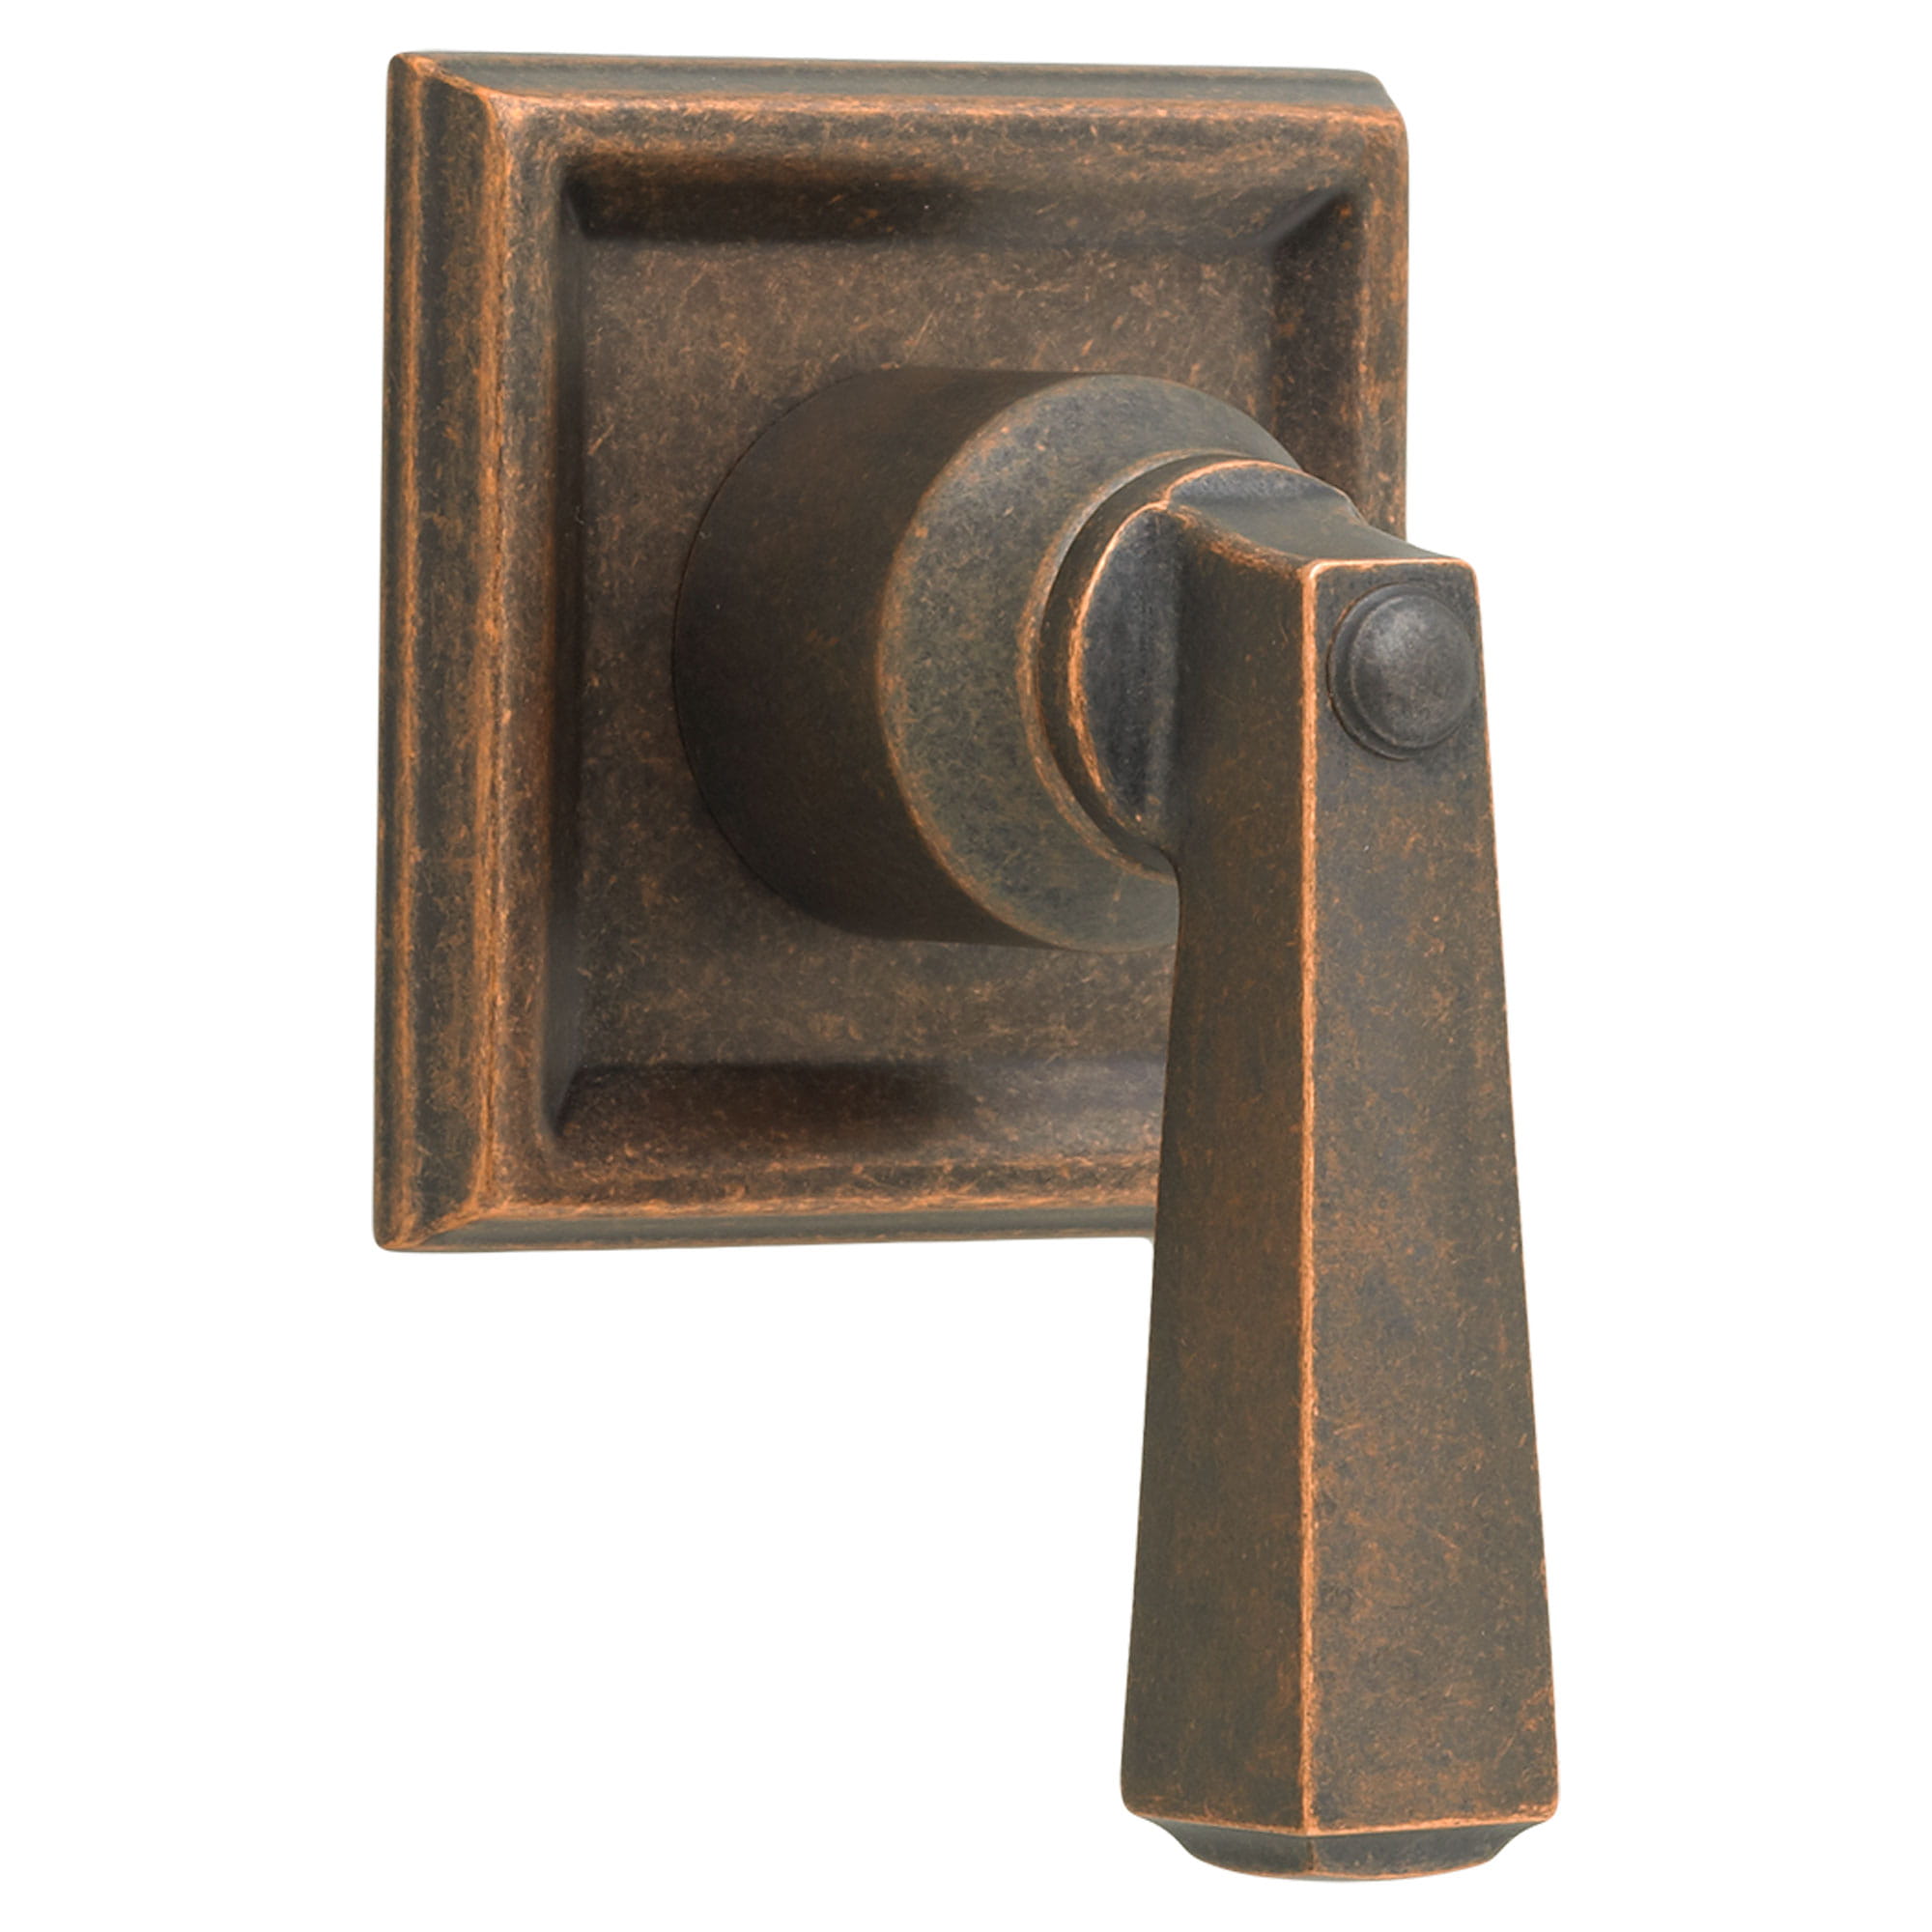 Town Square Single Handle On Off Volume Control Valve Trim OIL RUBBED BRONZE